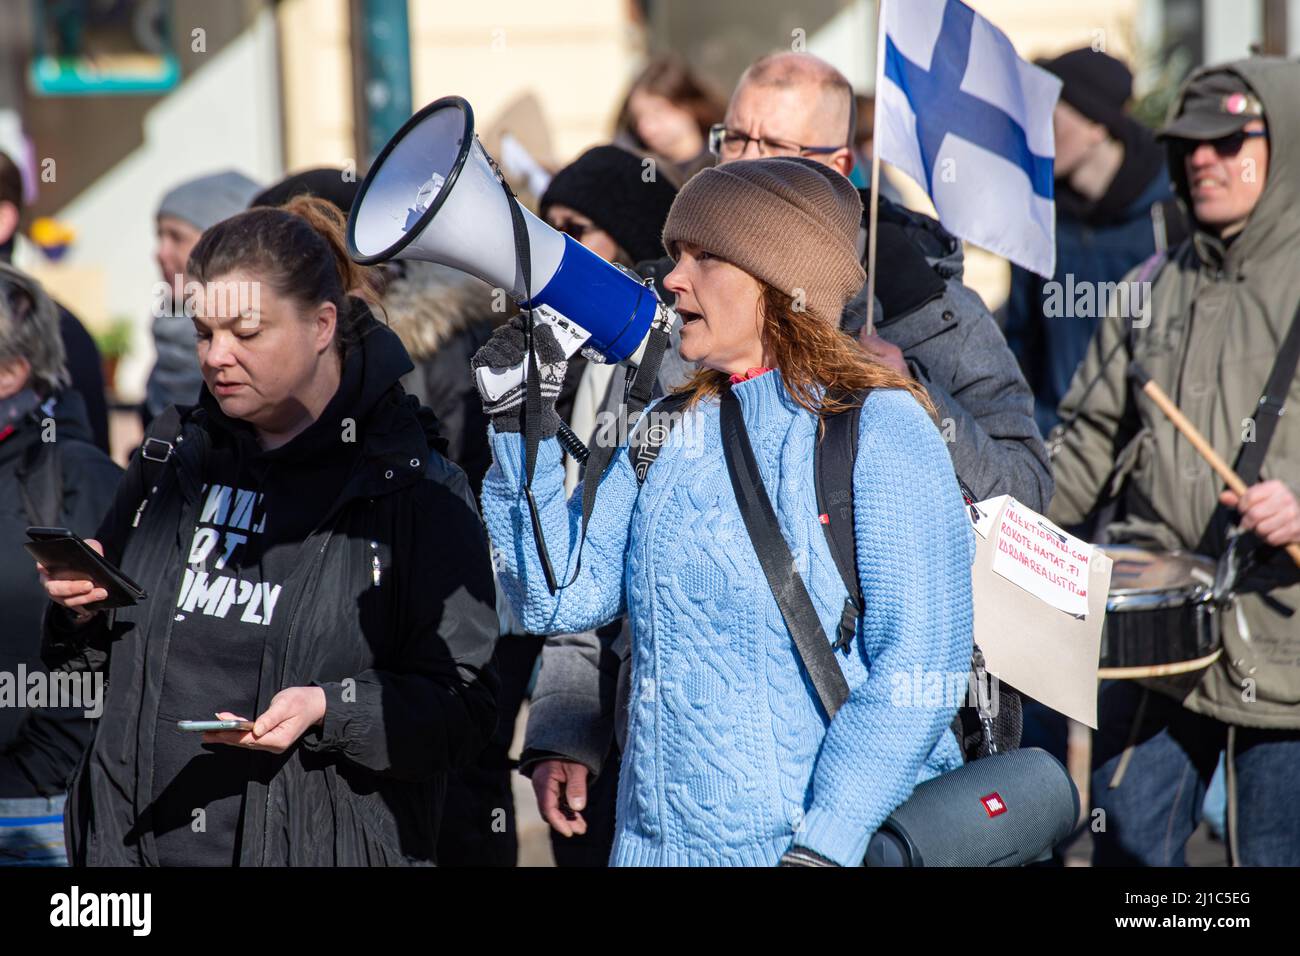 Middle-aged woman with megaphone or loudhailer at anti-vaccination Worldwide Demonstration 7.0 in Helsinki, Finland Stock Photo